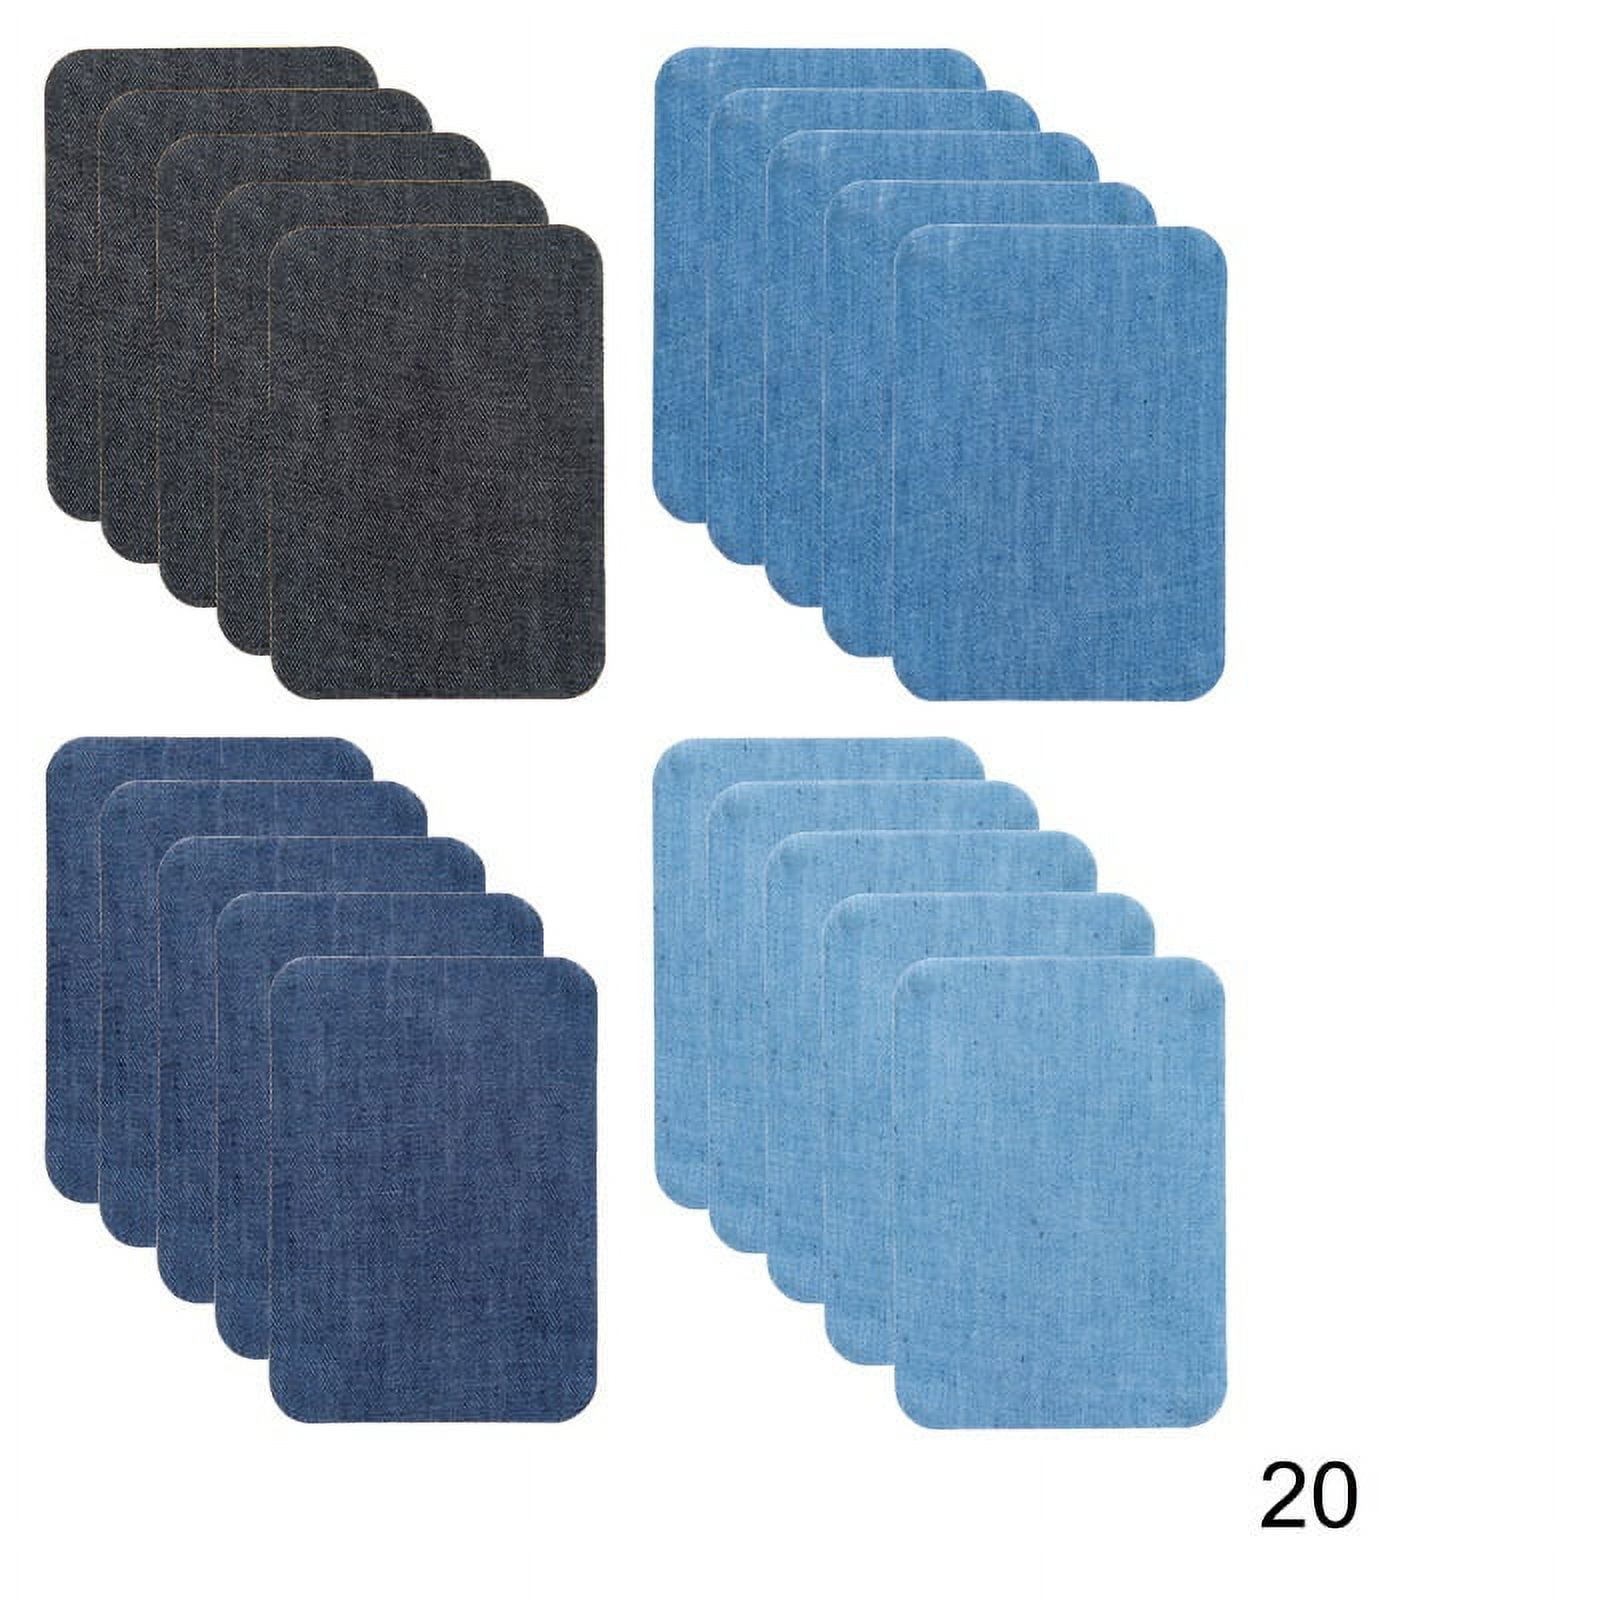 I-MART Denim Iron-On Patches (12 Pieces) 